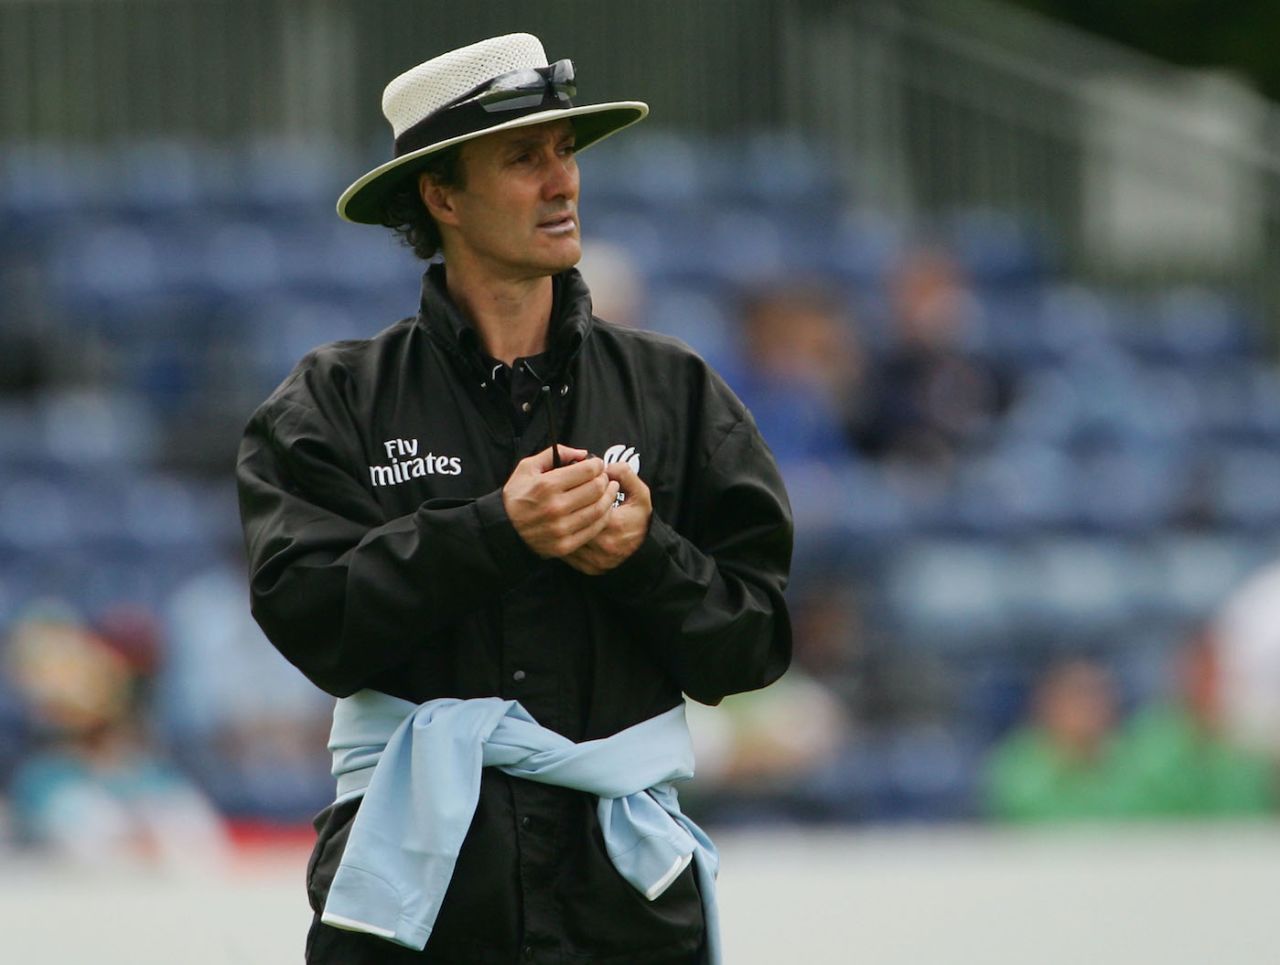 Billy Bowden watches play, only ODI, India vs Ireland, Civil Service Cricket Club, Stormont, Belfast, June 23, 2007